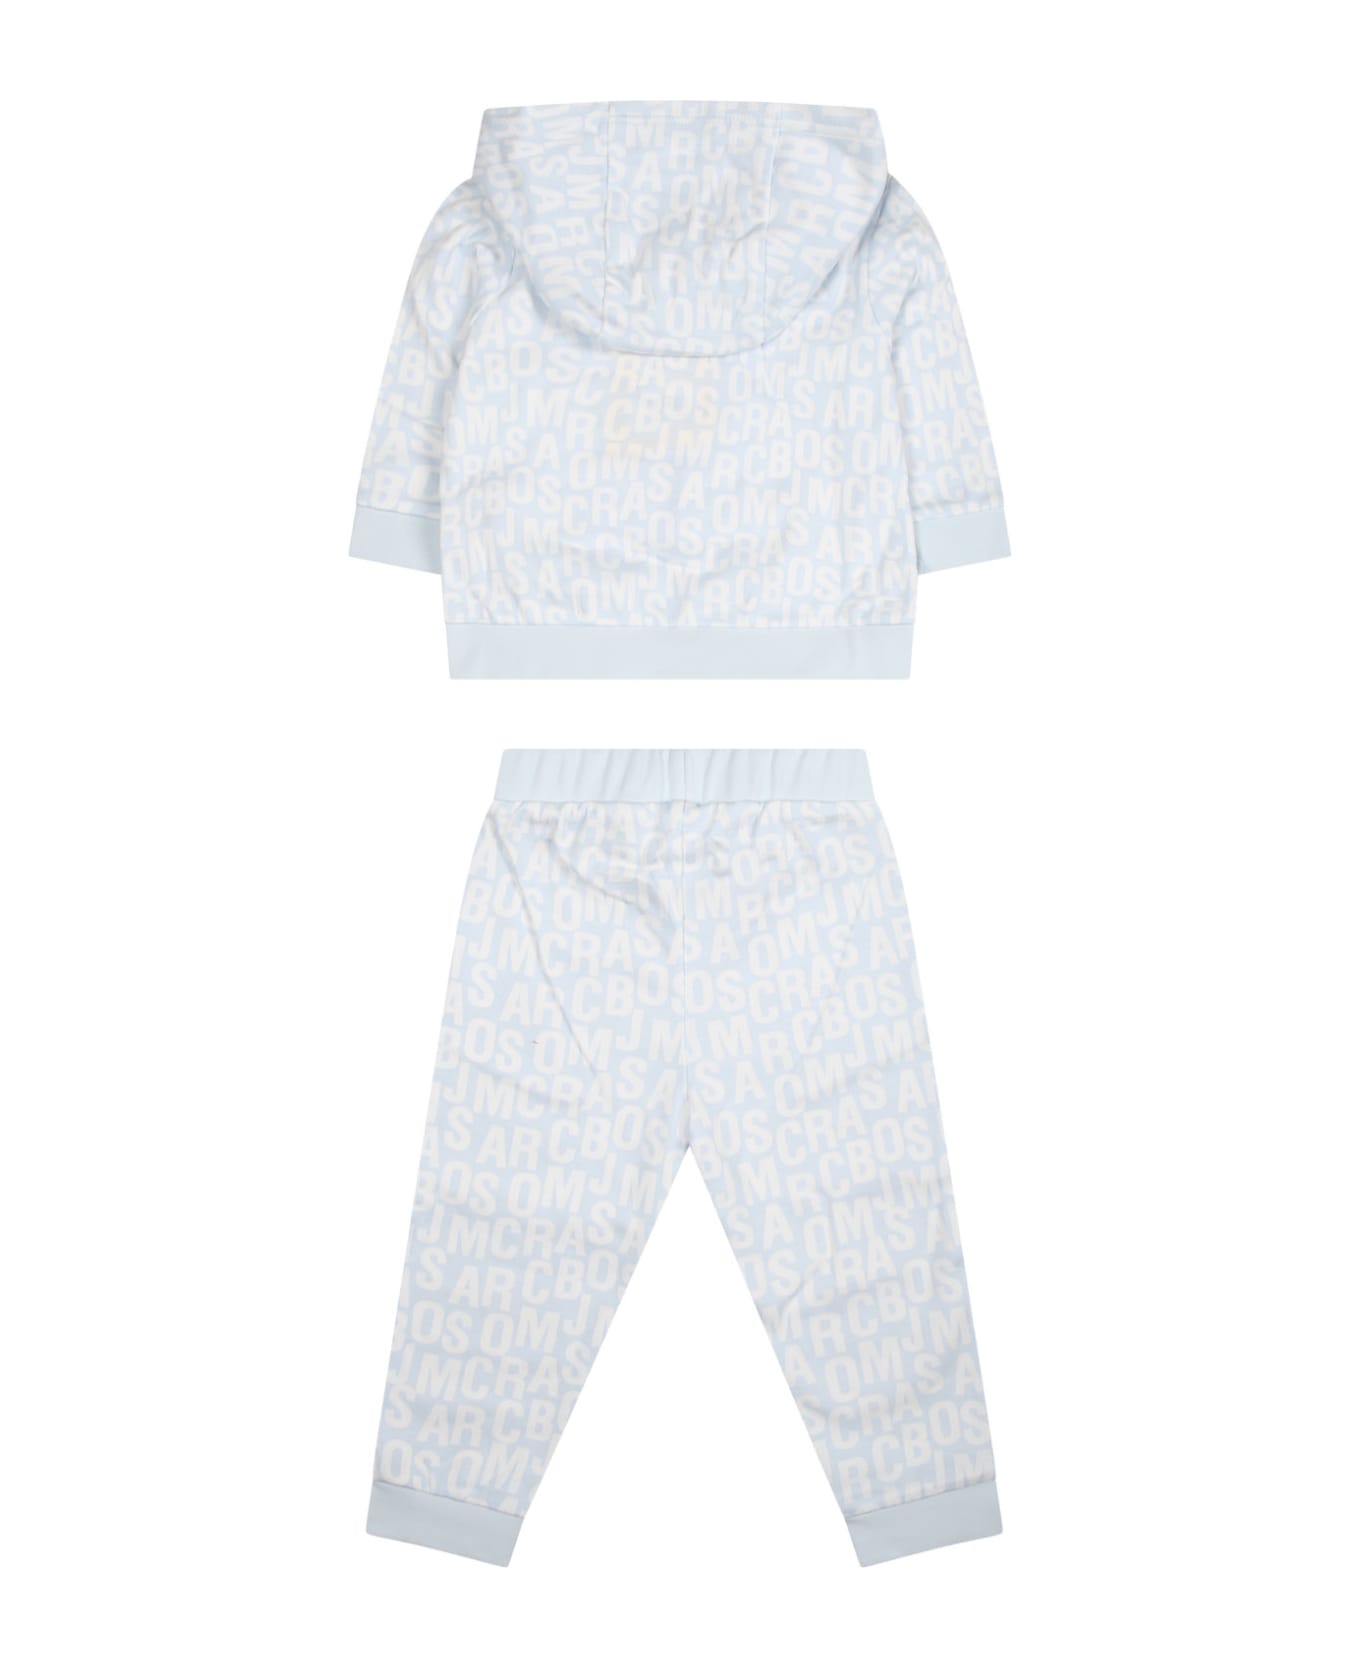 Little Marc Jacobs Light Blue Suit For Baby Boy With Logo - Light Blue